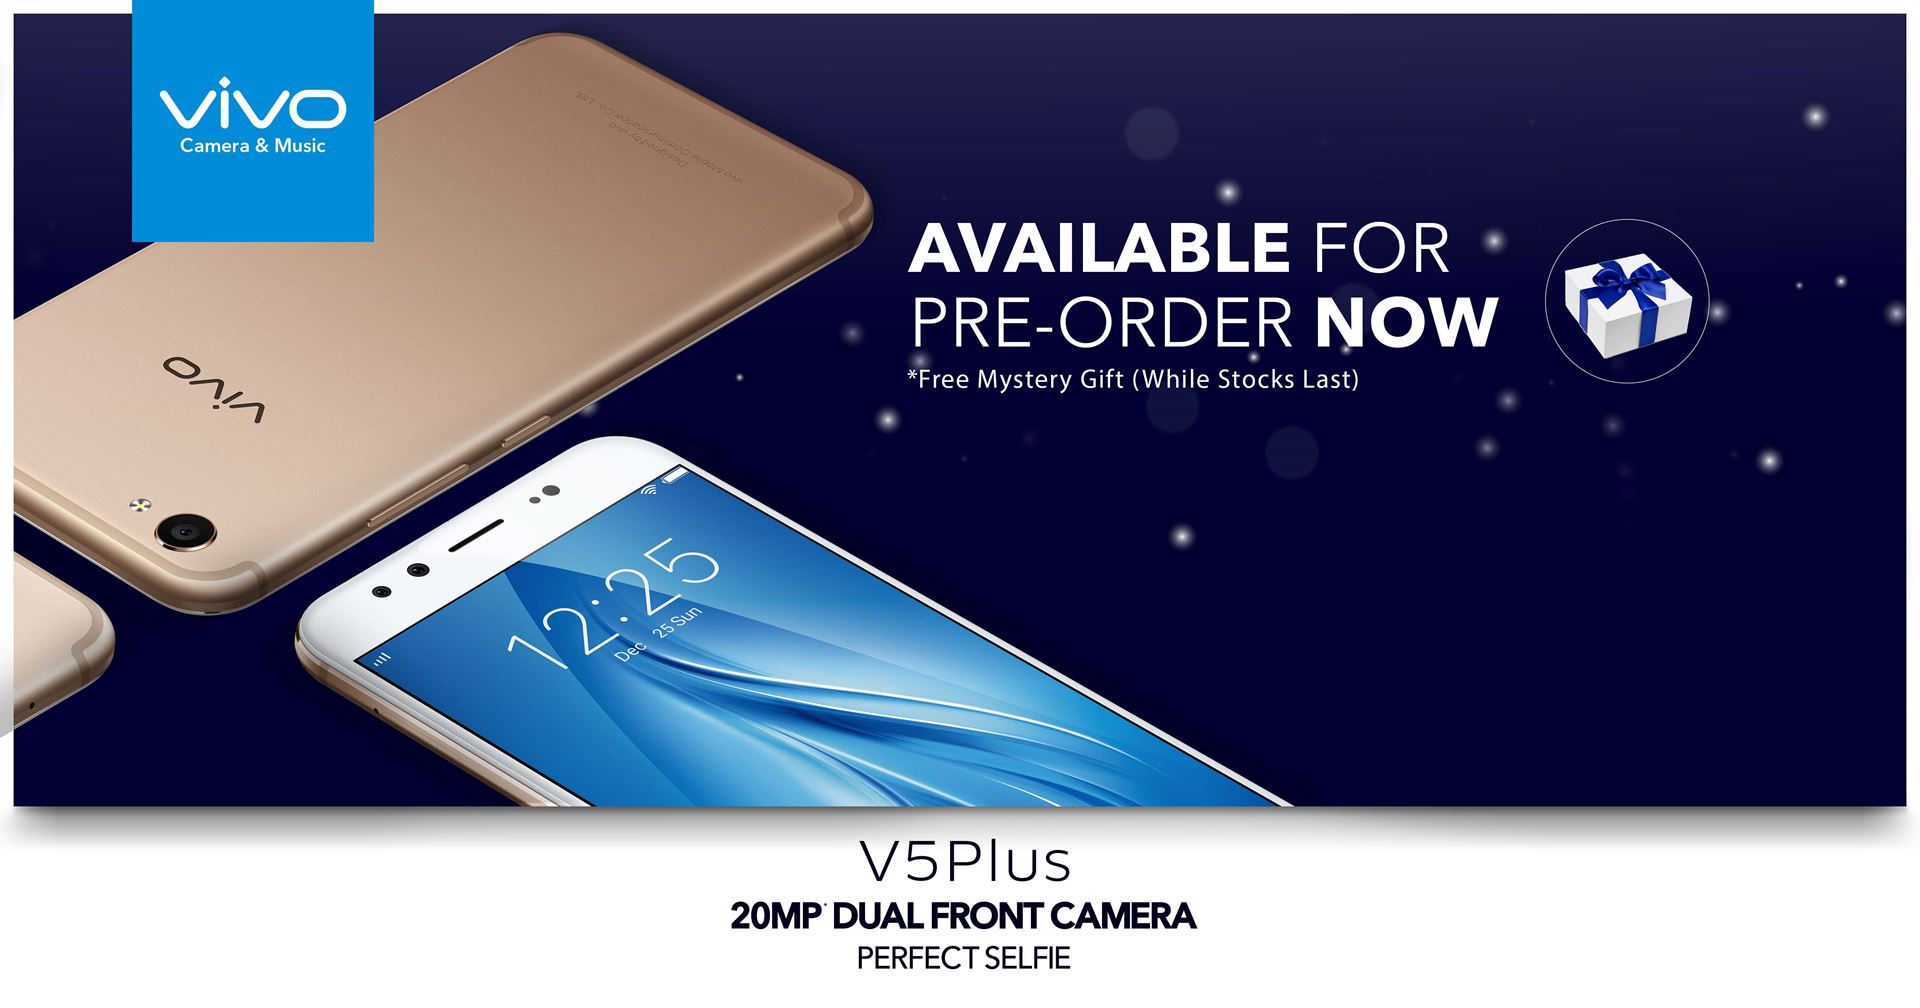 vivo V5Plus Now Available for Pre-Order